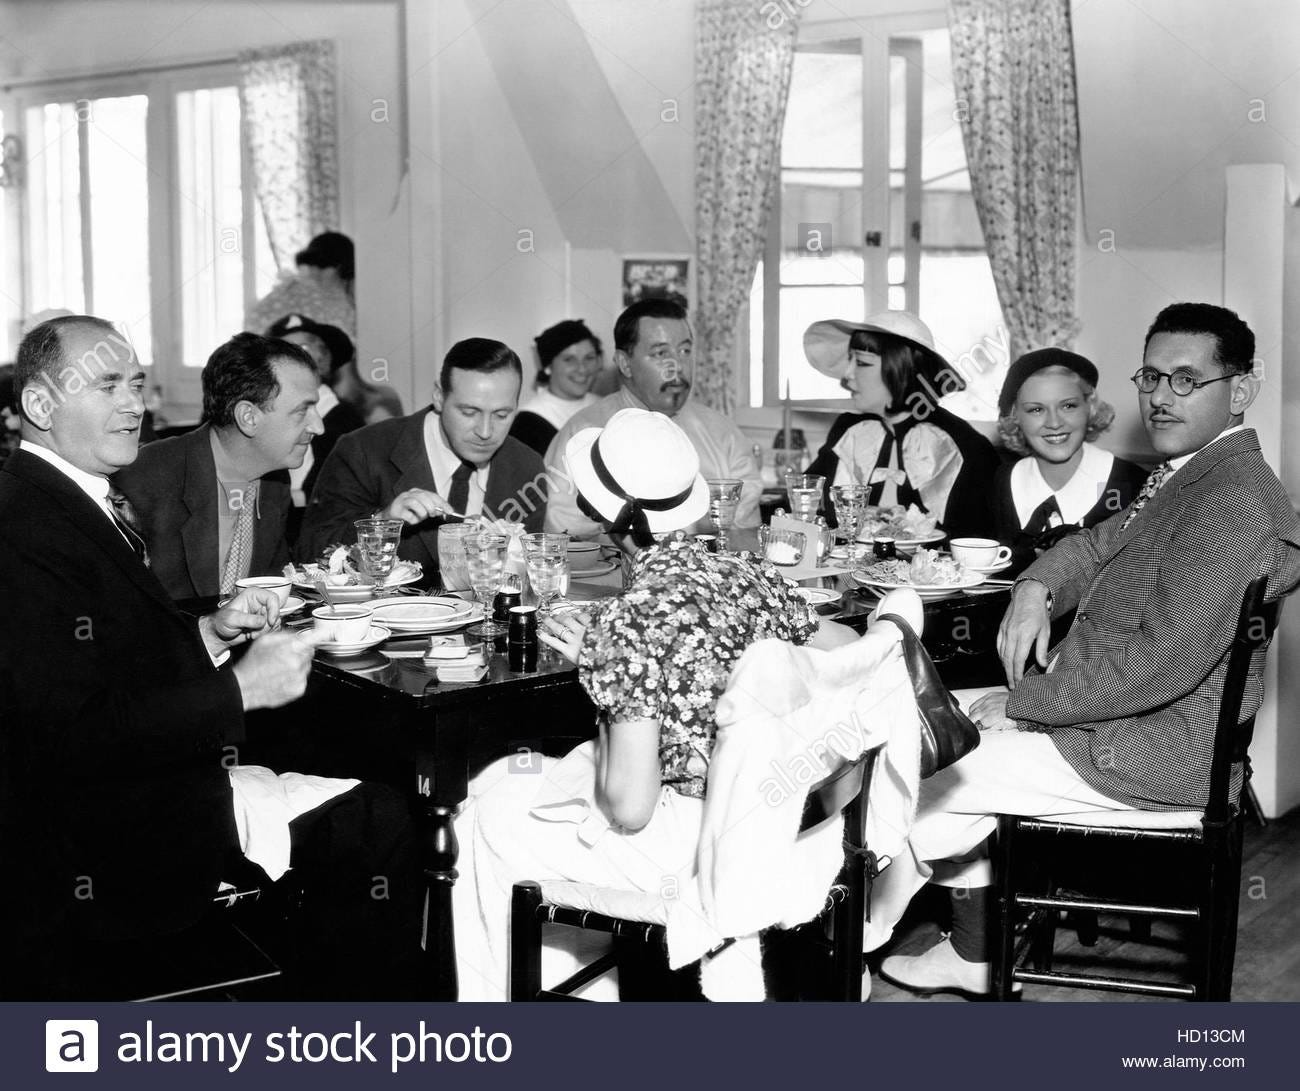 black and white photo of a group of film people at dinner, including Harry Lachman, Warner Oland, and Quon Tai Lachman